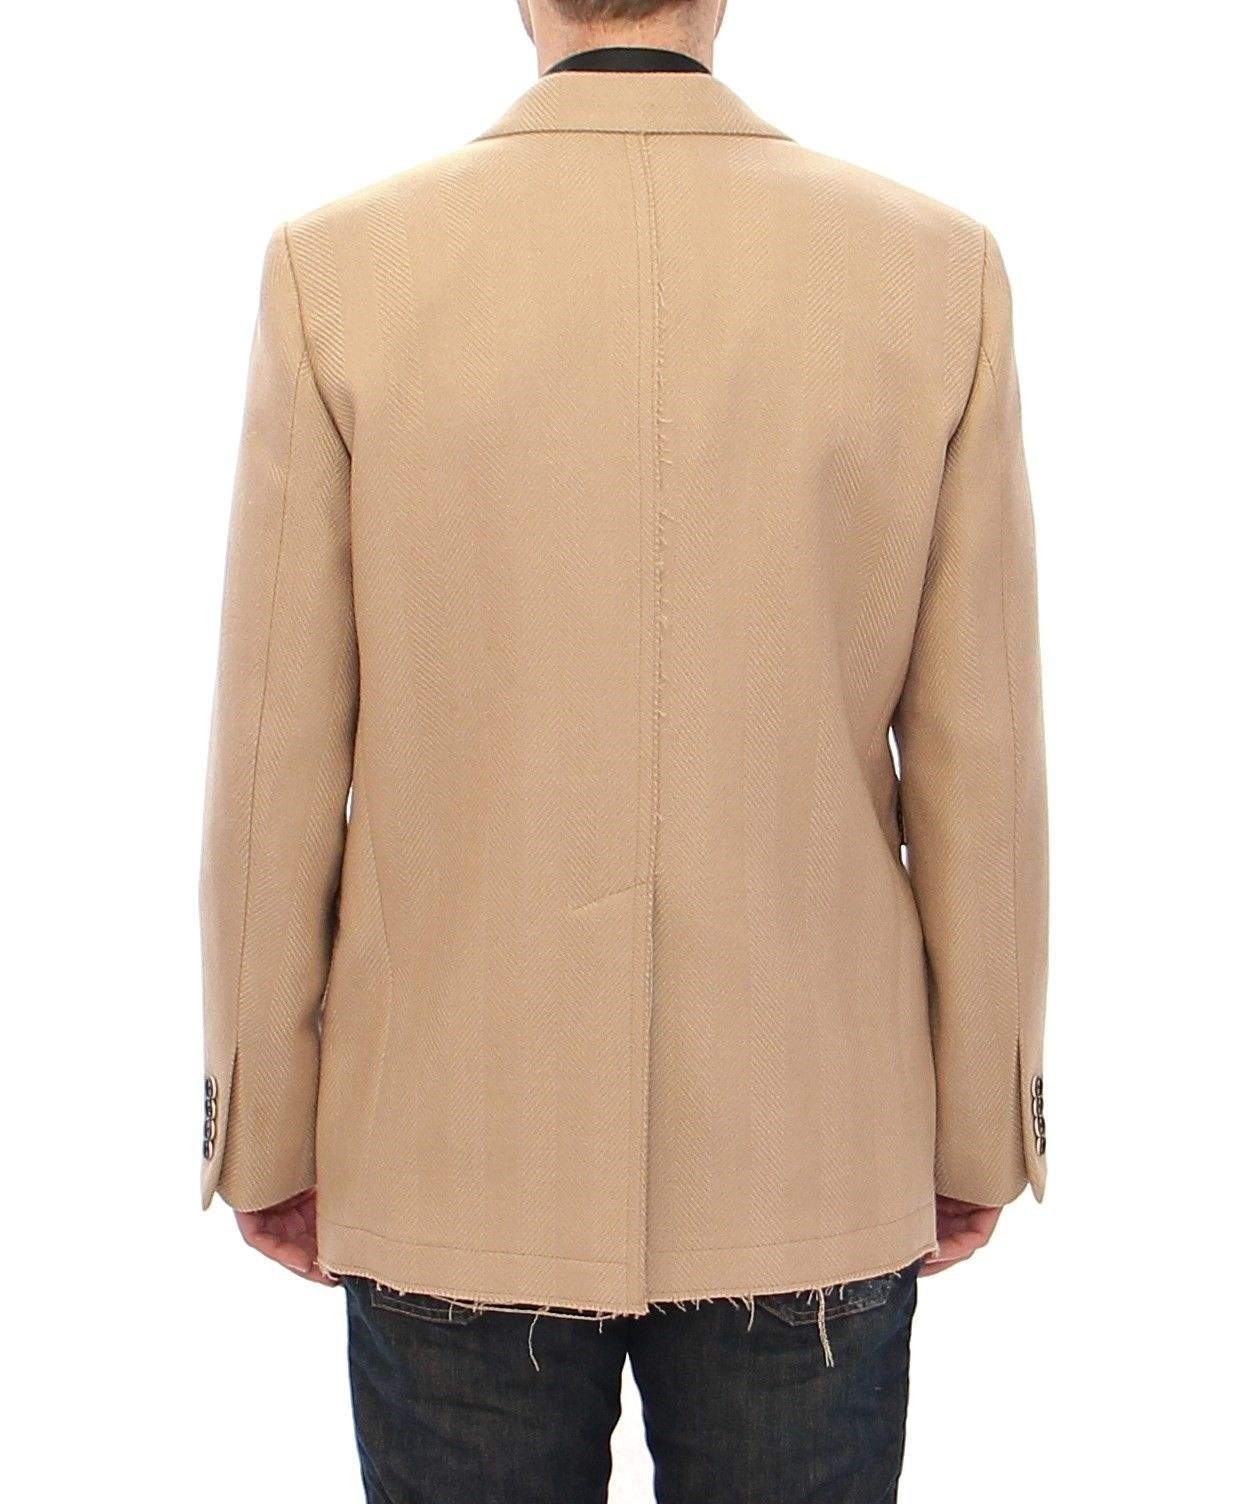 Dolce & Gabbana  Beige Double Breasted Coat Jacket #men, Beige, Brand_Dolce & Gabbana, Catch, Dolce & Gabbana, feed-agegroup-adult, feed-color-beige, feed-gender-male, feed-size-IT44 | XS, feed-size-IT46 | S, feed-size-IT50 | L, Gender_Men, IT44 | XS, IT46 | S, IT50 | L, IT52 | XL, Jackets - Men - Clothing, Kogan at SEYMAYKA